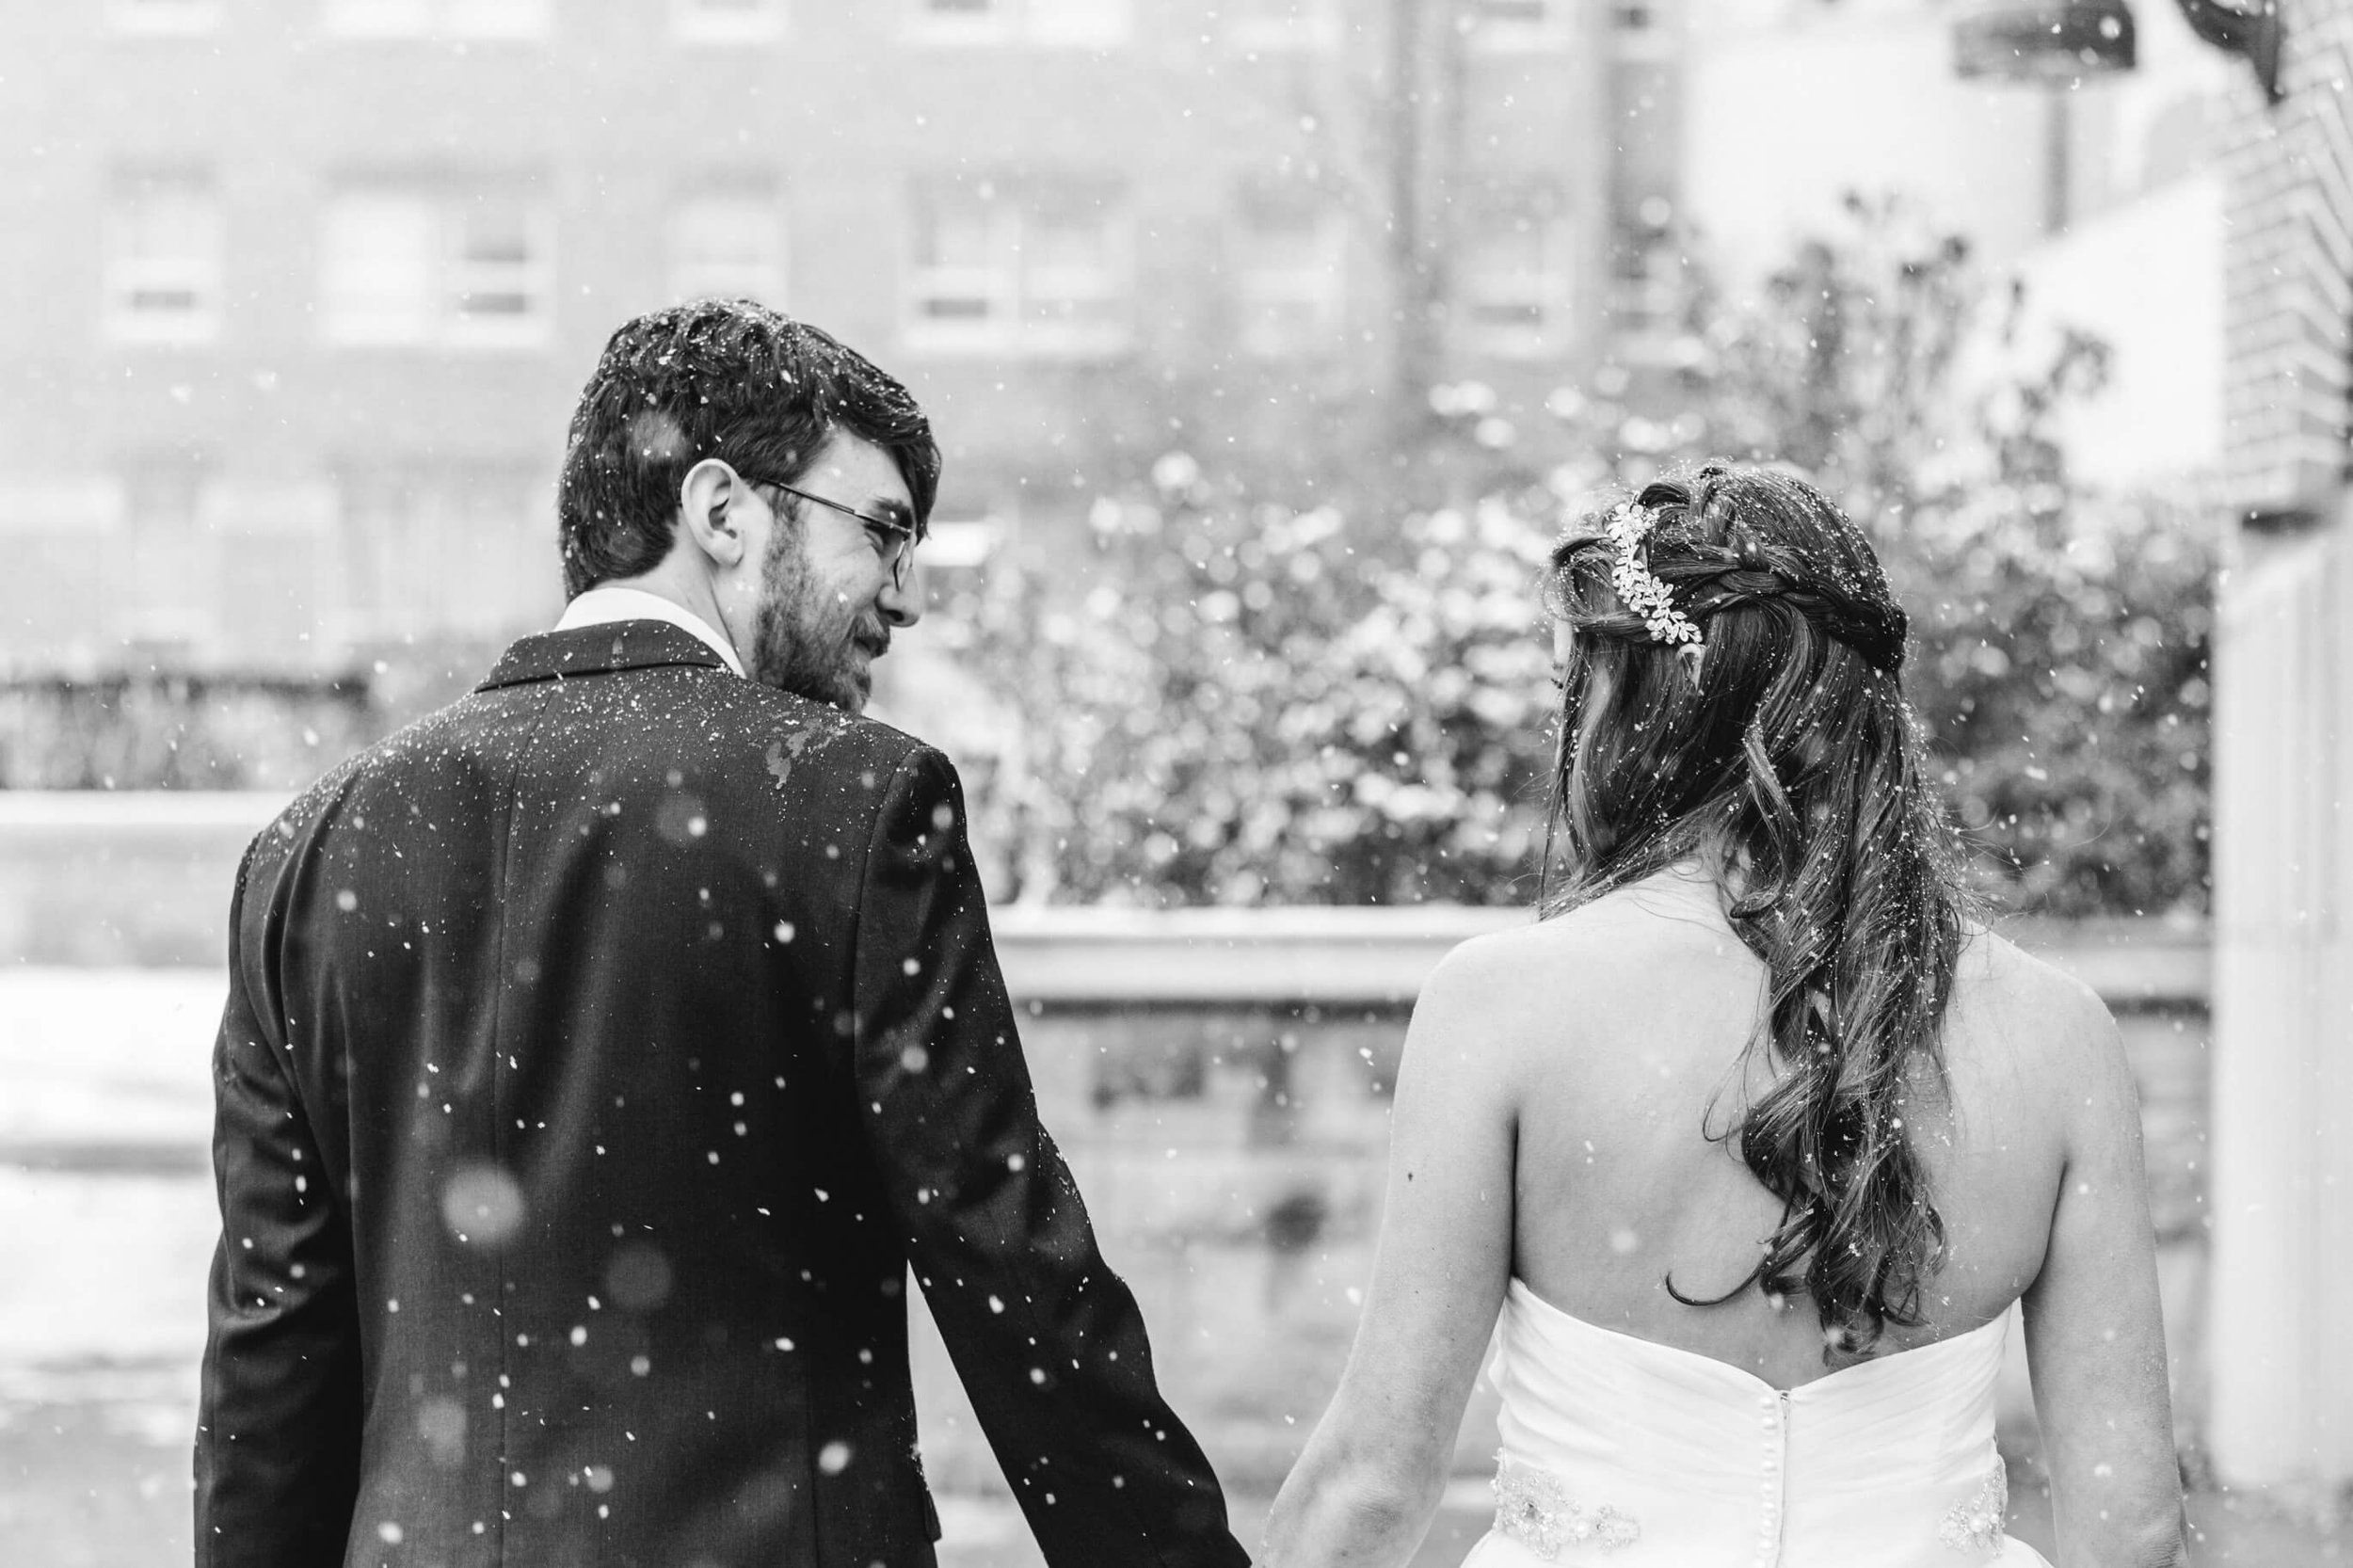 Check out a beautiful Colorado Mountain Winter Wedding captured by the candid and photojournalistic wedding team From CliftonMarie Photography in Denver, Colorado.